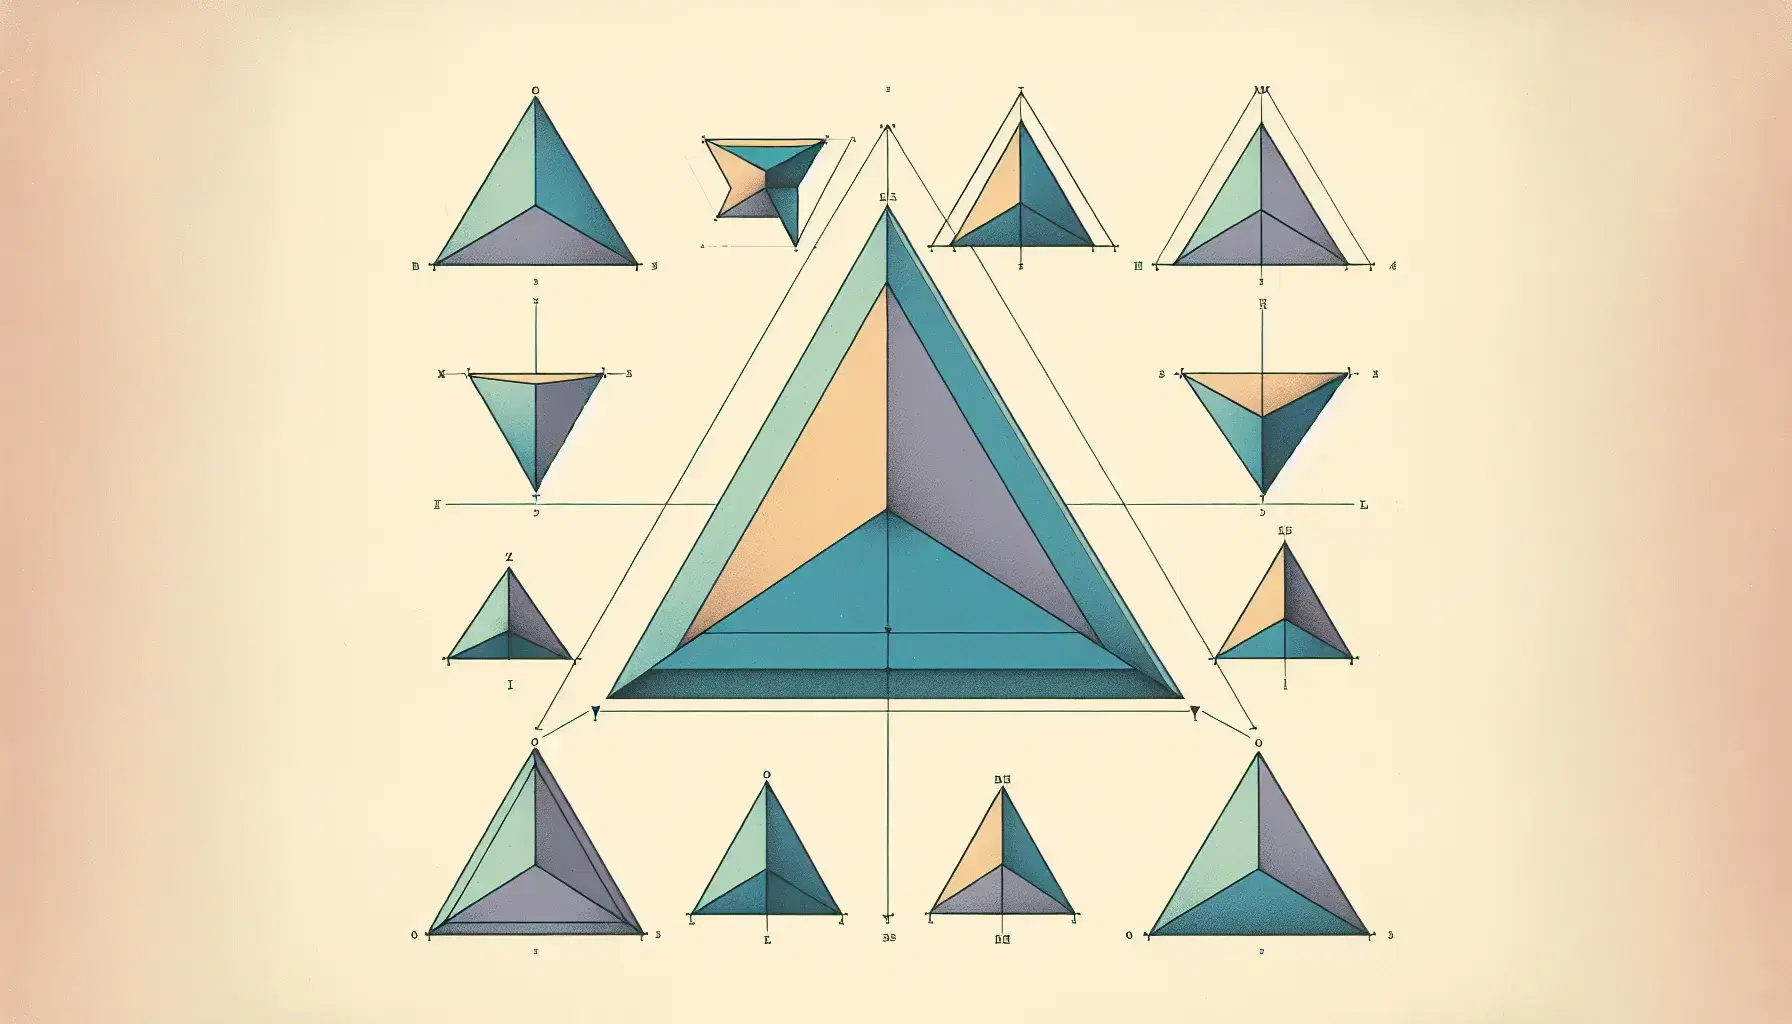 Variety of colored triangles on white background with grid, including equilateral in sky-blue, lavender isosceles, pale green scalene, and light orange right-angled.